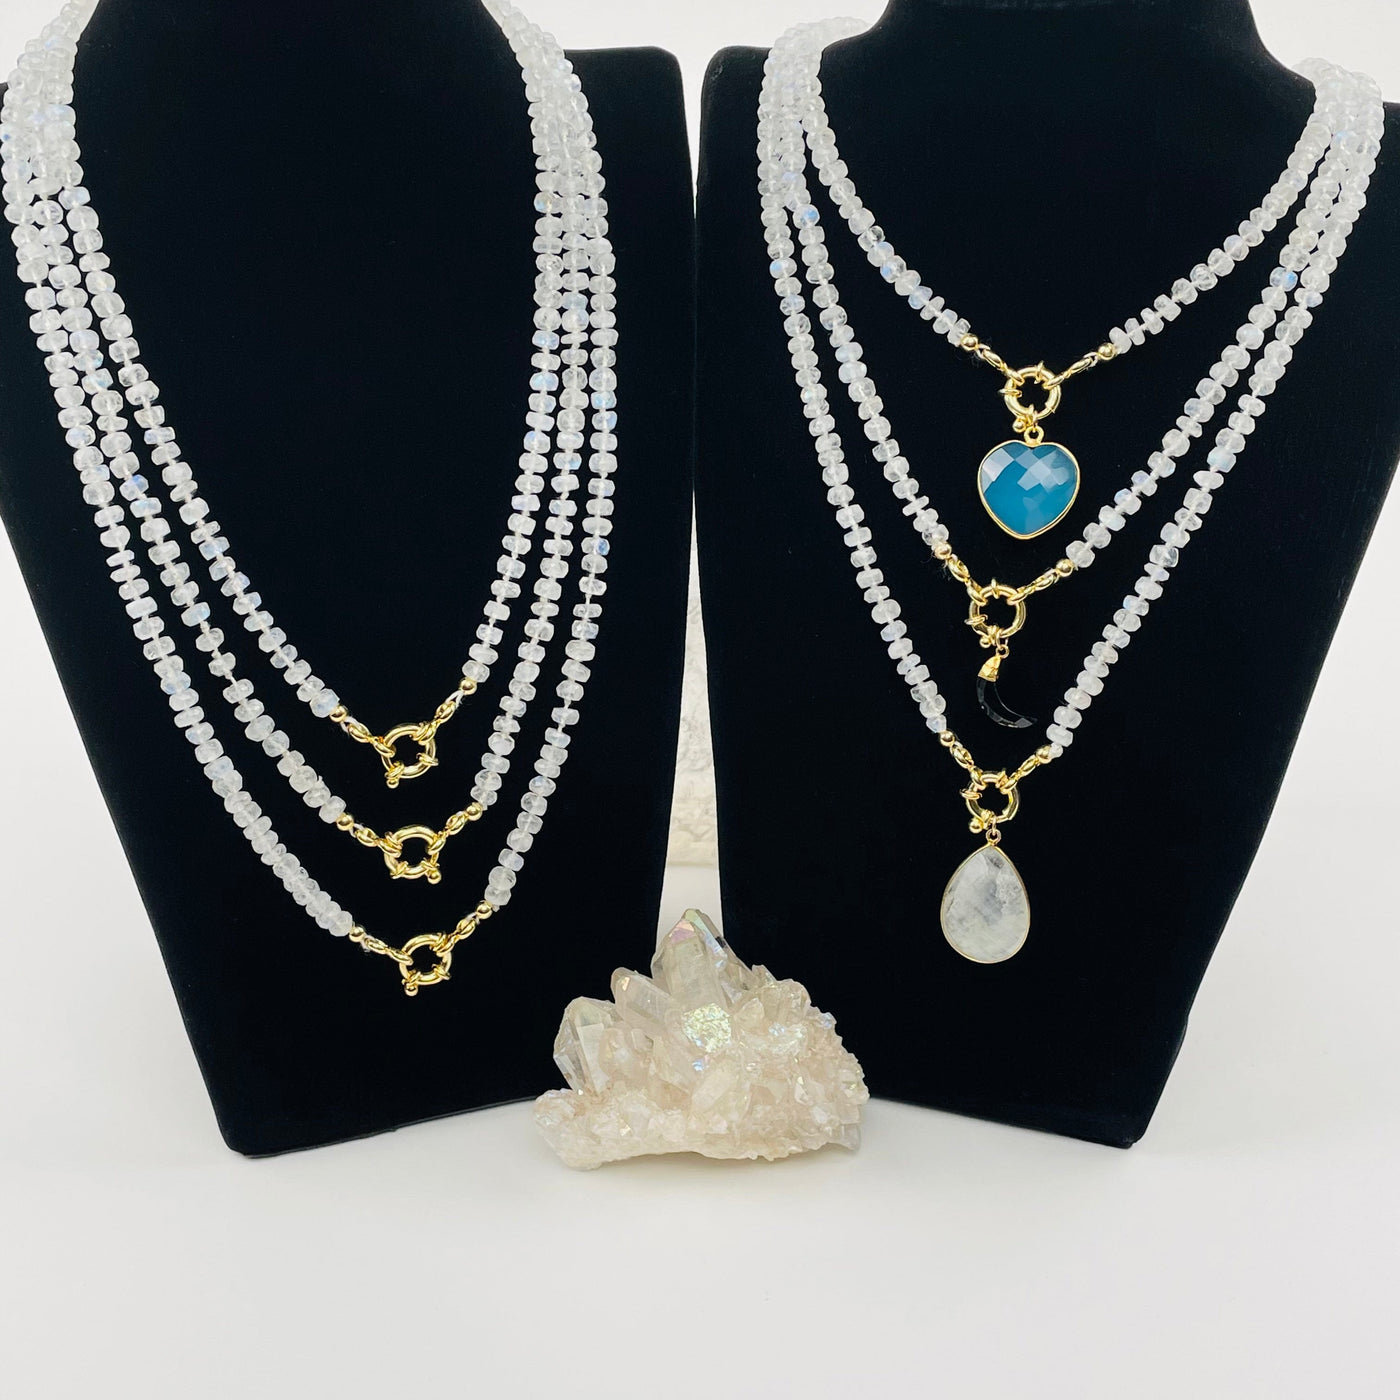 moonstone candy necklaces displayed with and without a candy charm 